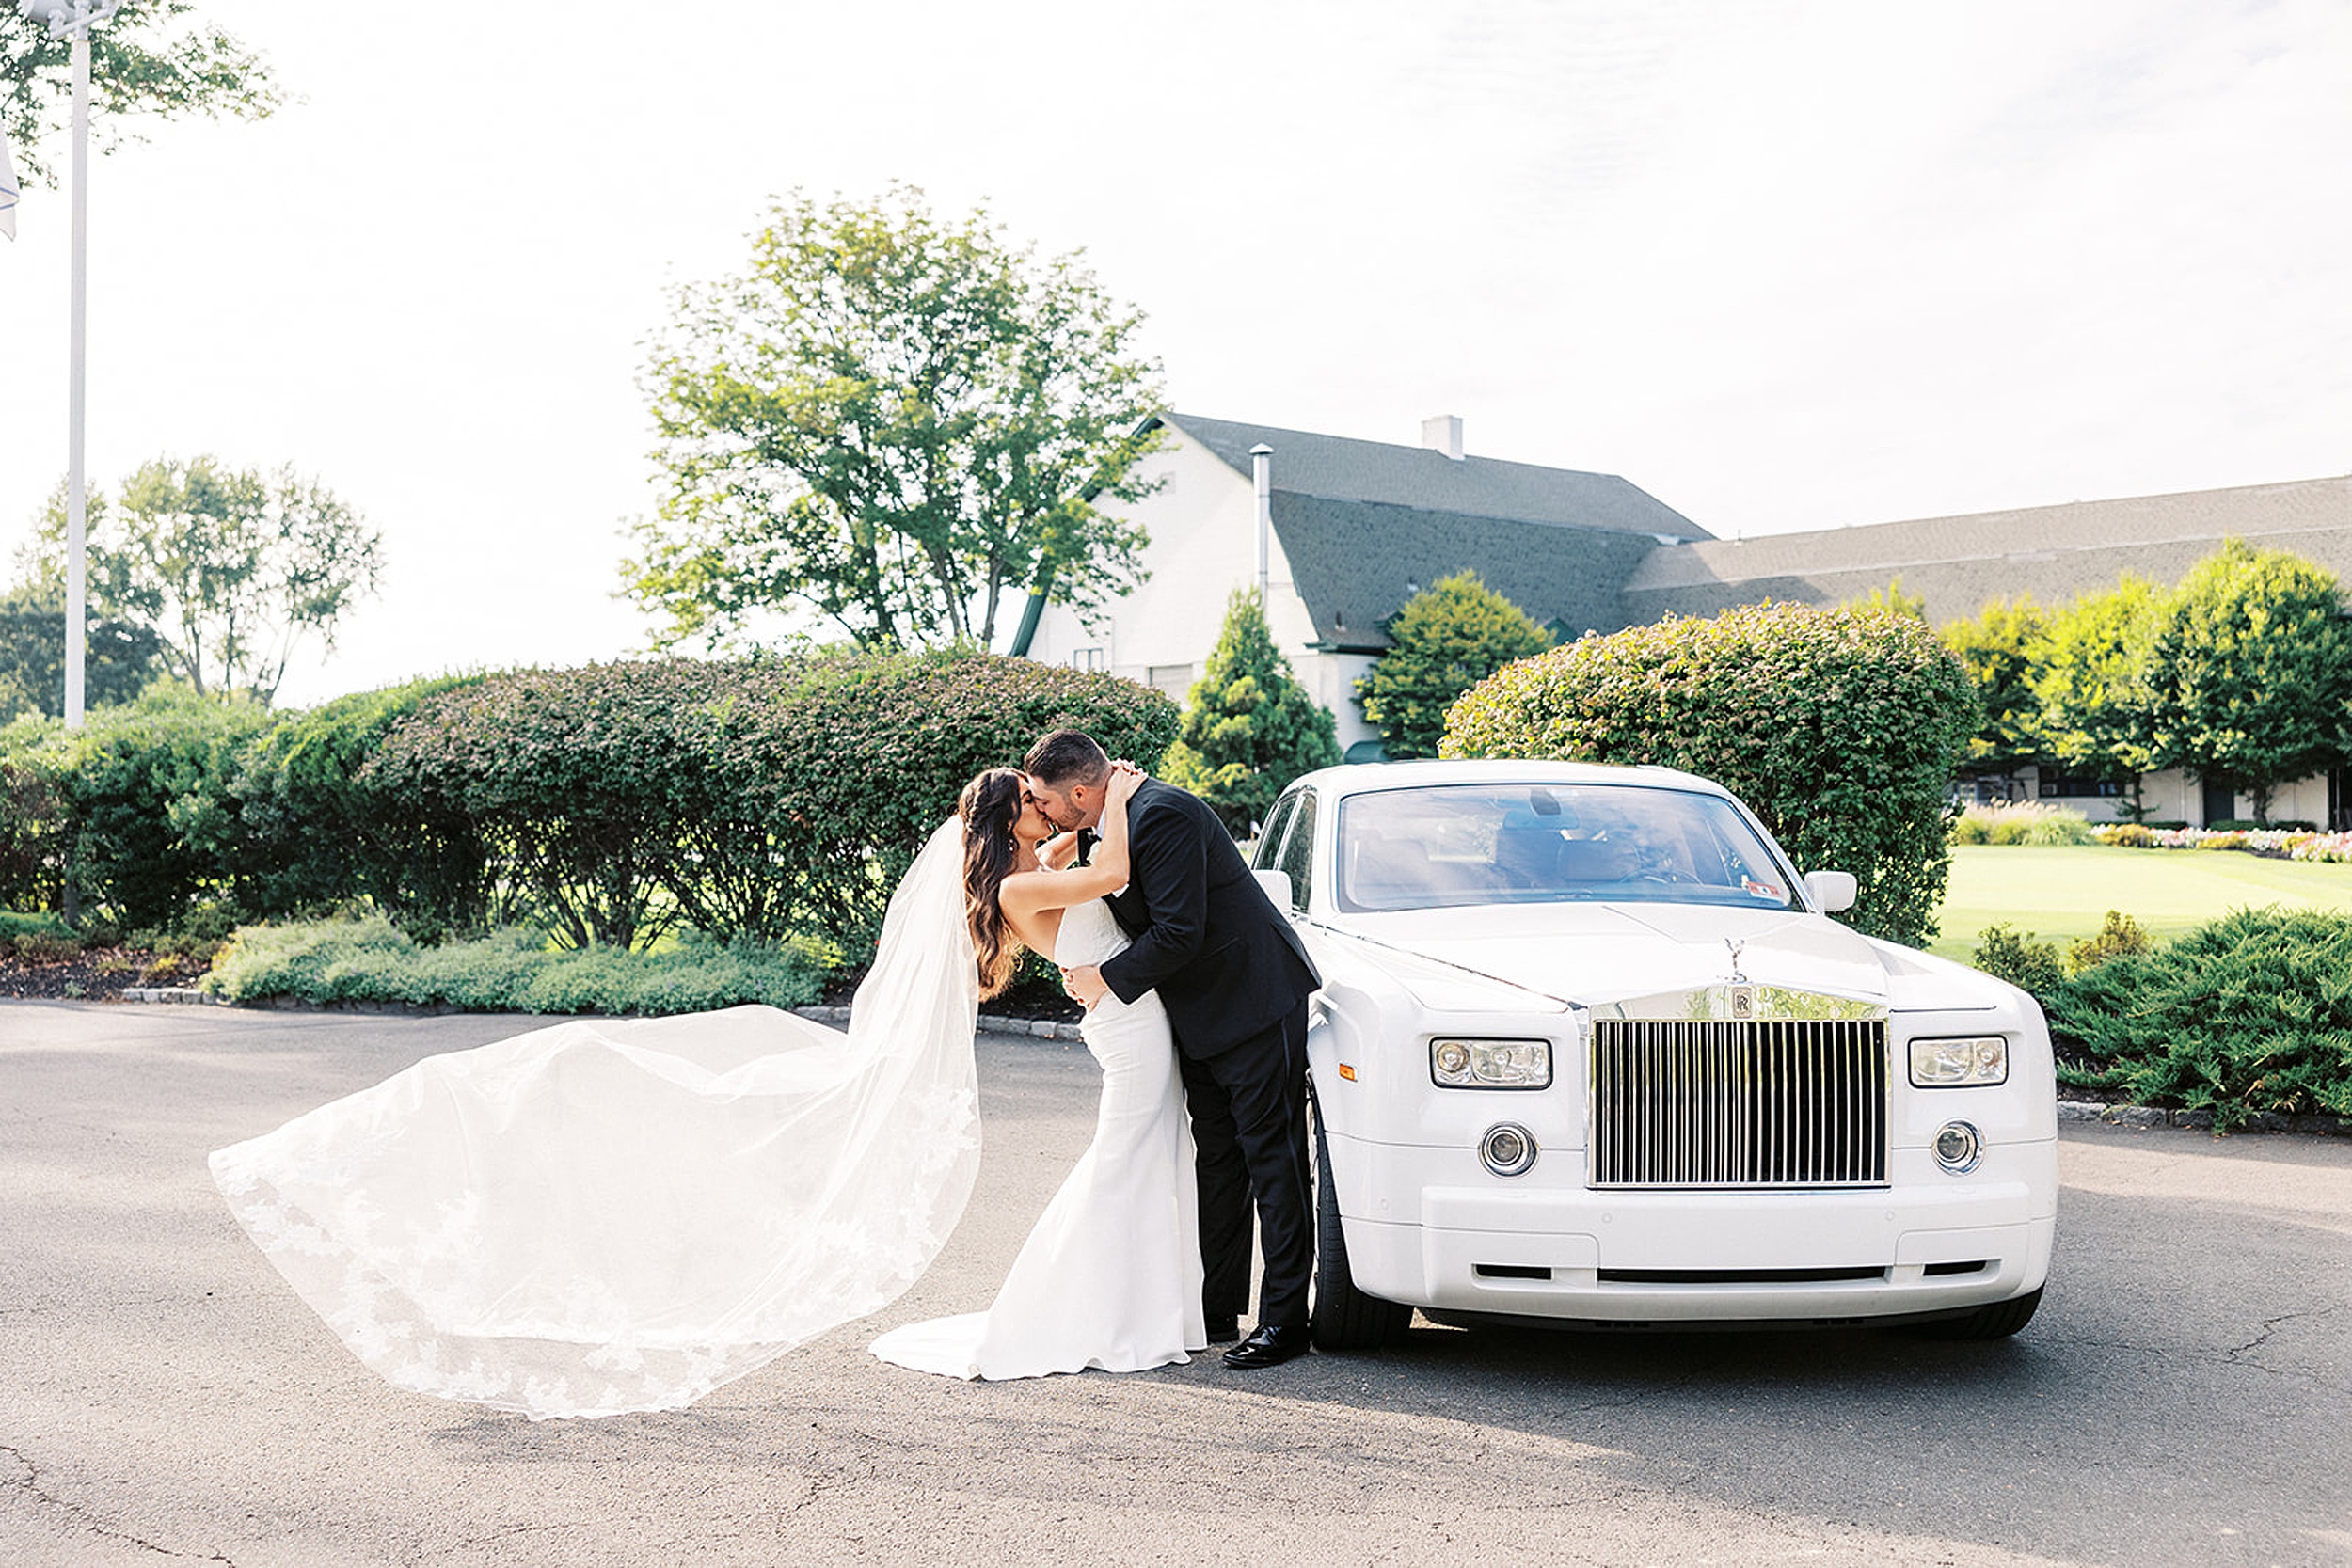 Newlyweds kiss as the long veil dances behind them in the wind against a luxury White Rolls Royce